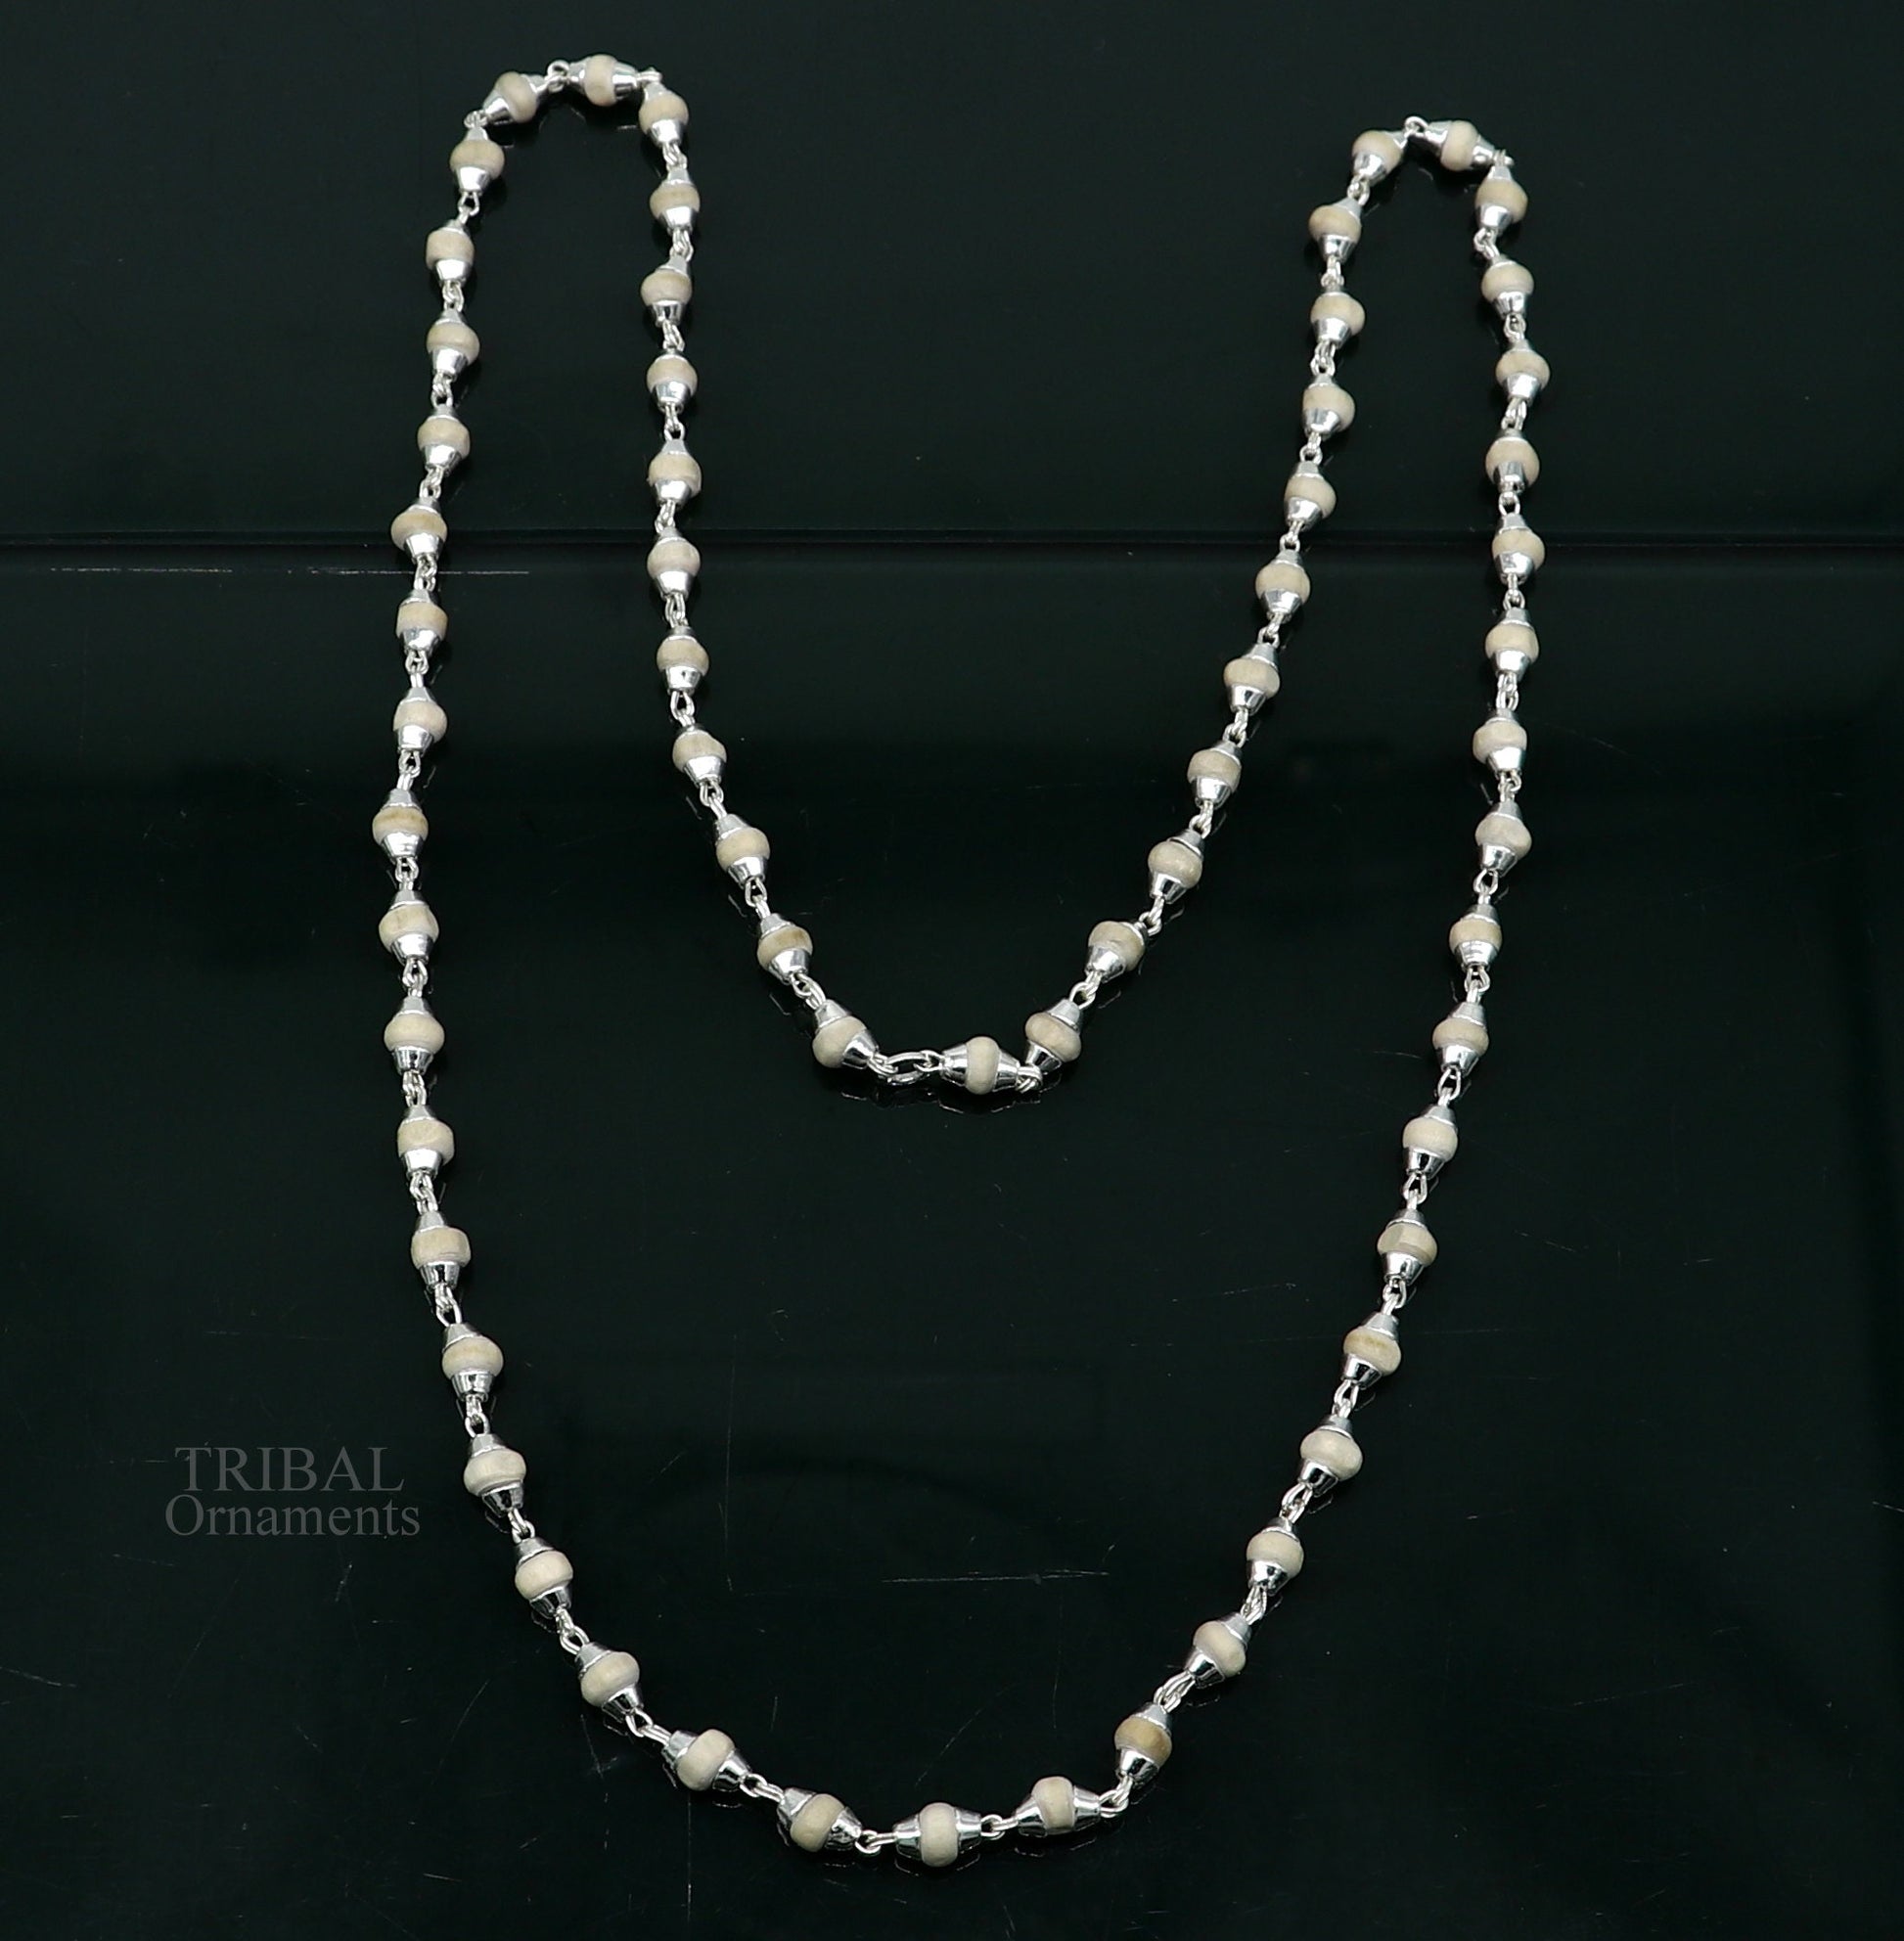 23" 4.5mm Sterling silver handmade Solid basil rosary plant wooden beads silver chain necklace tulsi mala use in Ayurveda meditation ch142 - TRIBAL ORNAMENTS